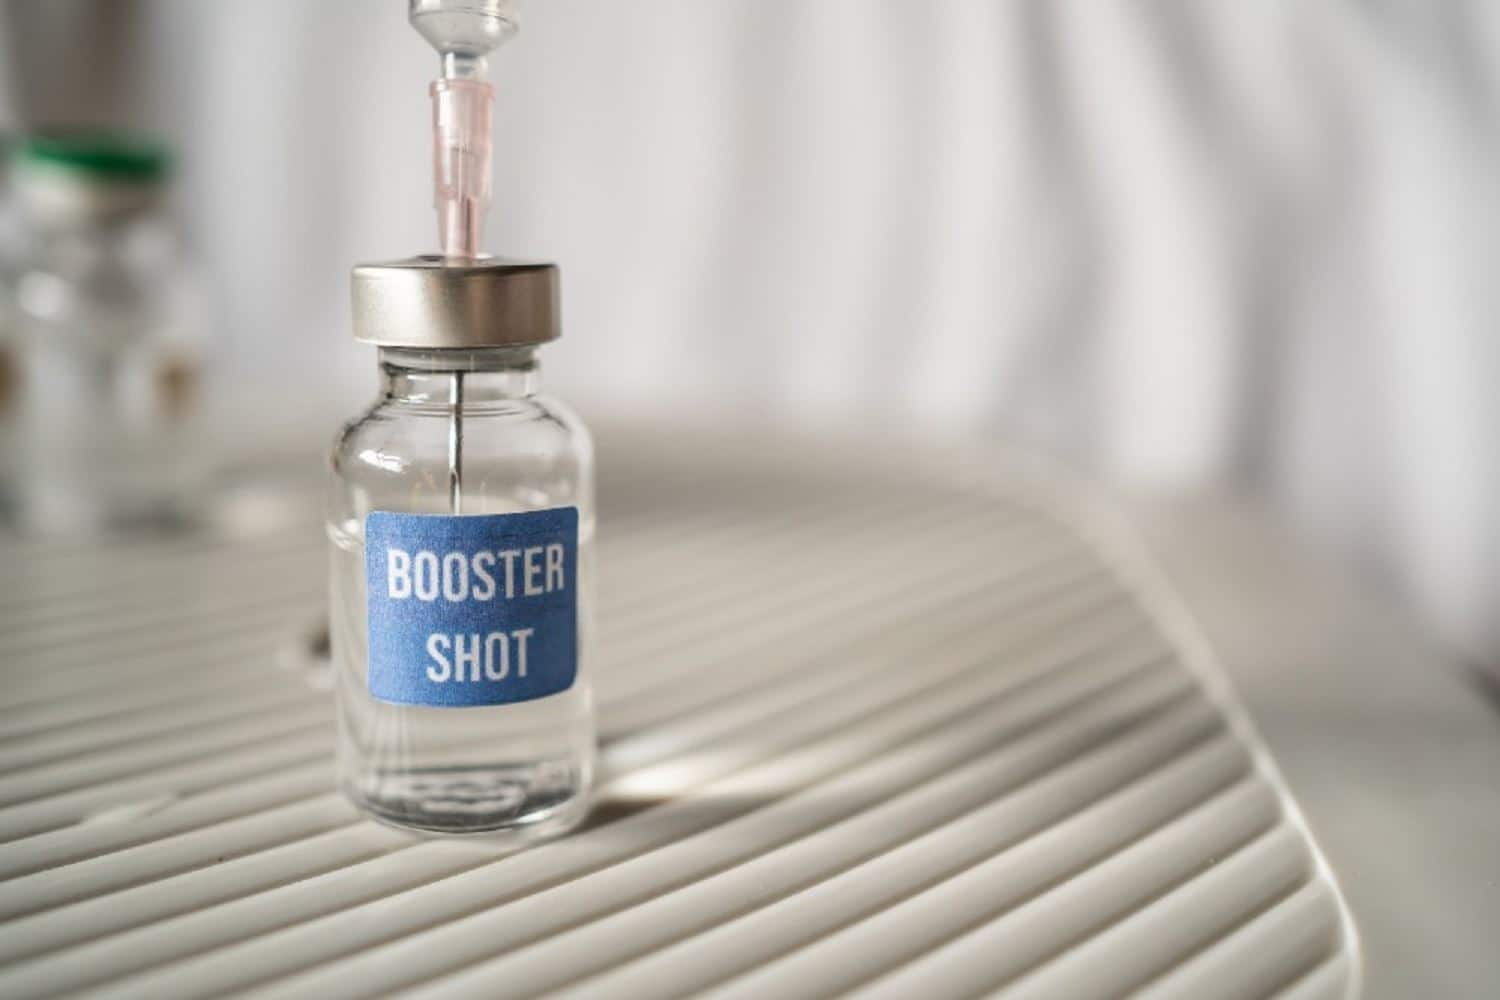 HHS plans September rollout of COVID vaccine booster shot